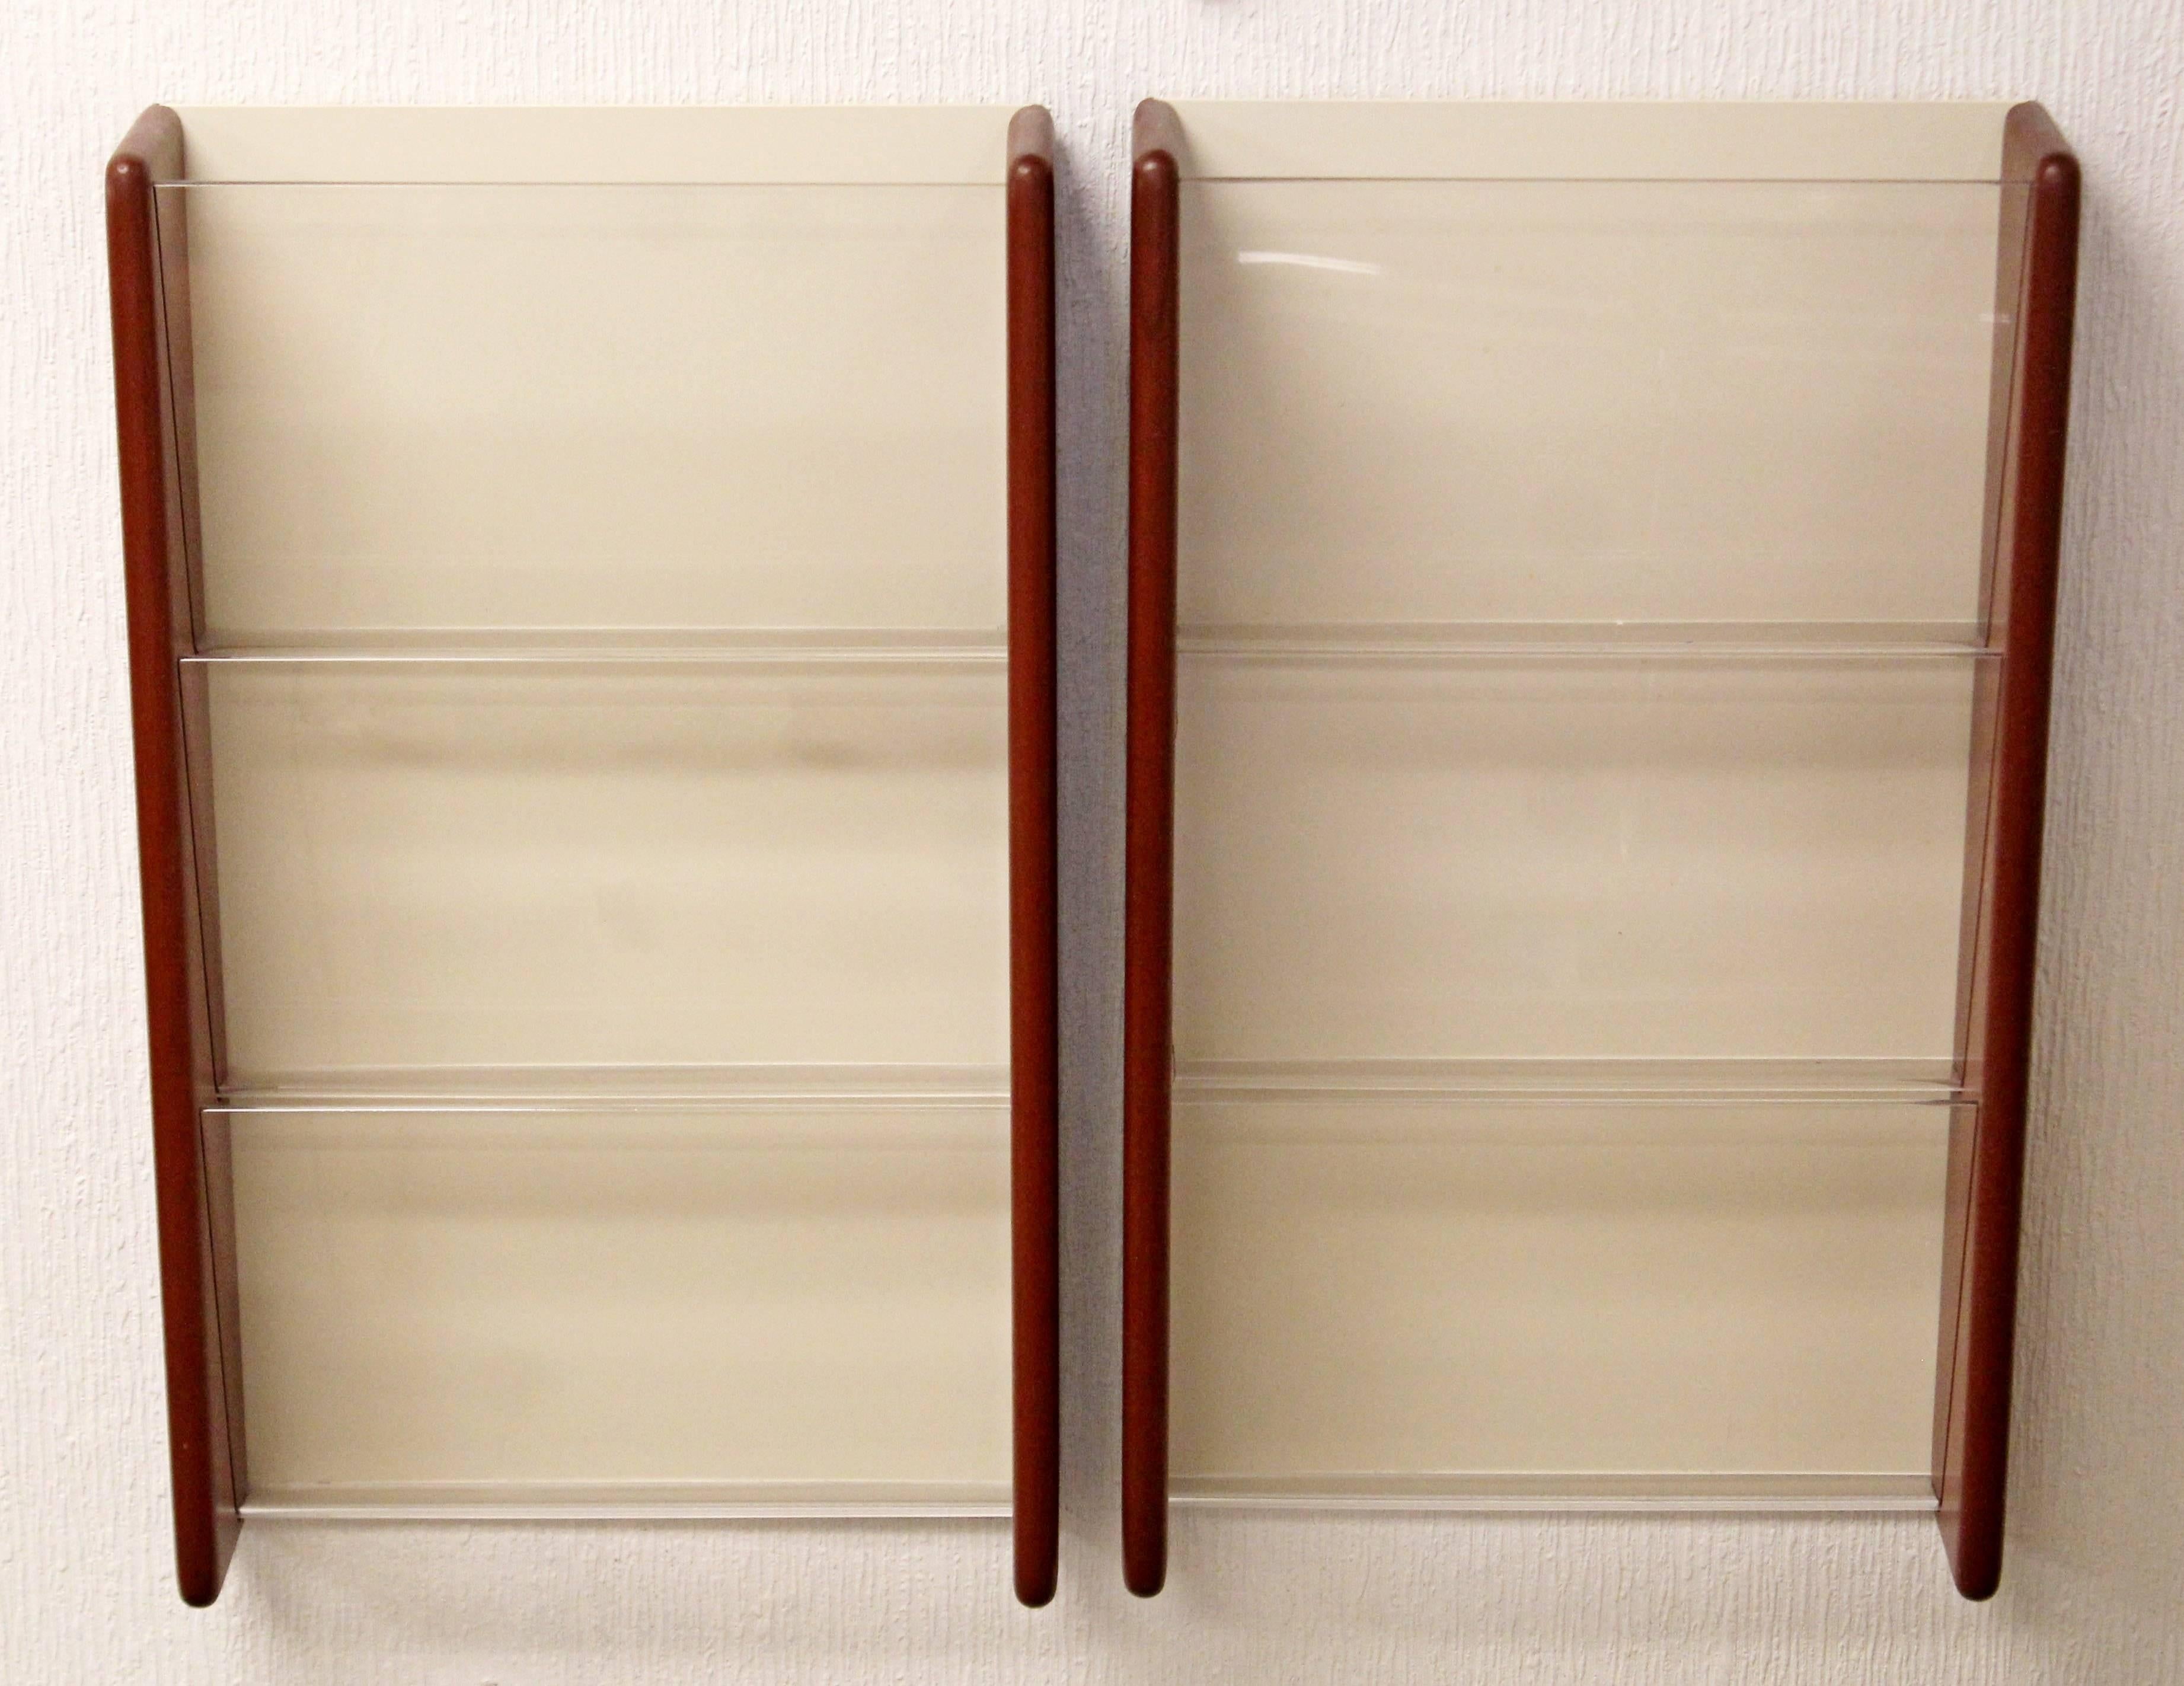 For your consideration is a pair of wall-mounted, walnut and white laminate, magazine racks by Peter Pepper, circa the 1970s. In excellent condition. The dimensions are 13.5